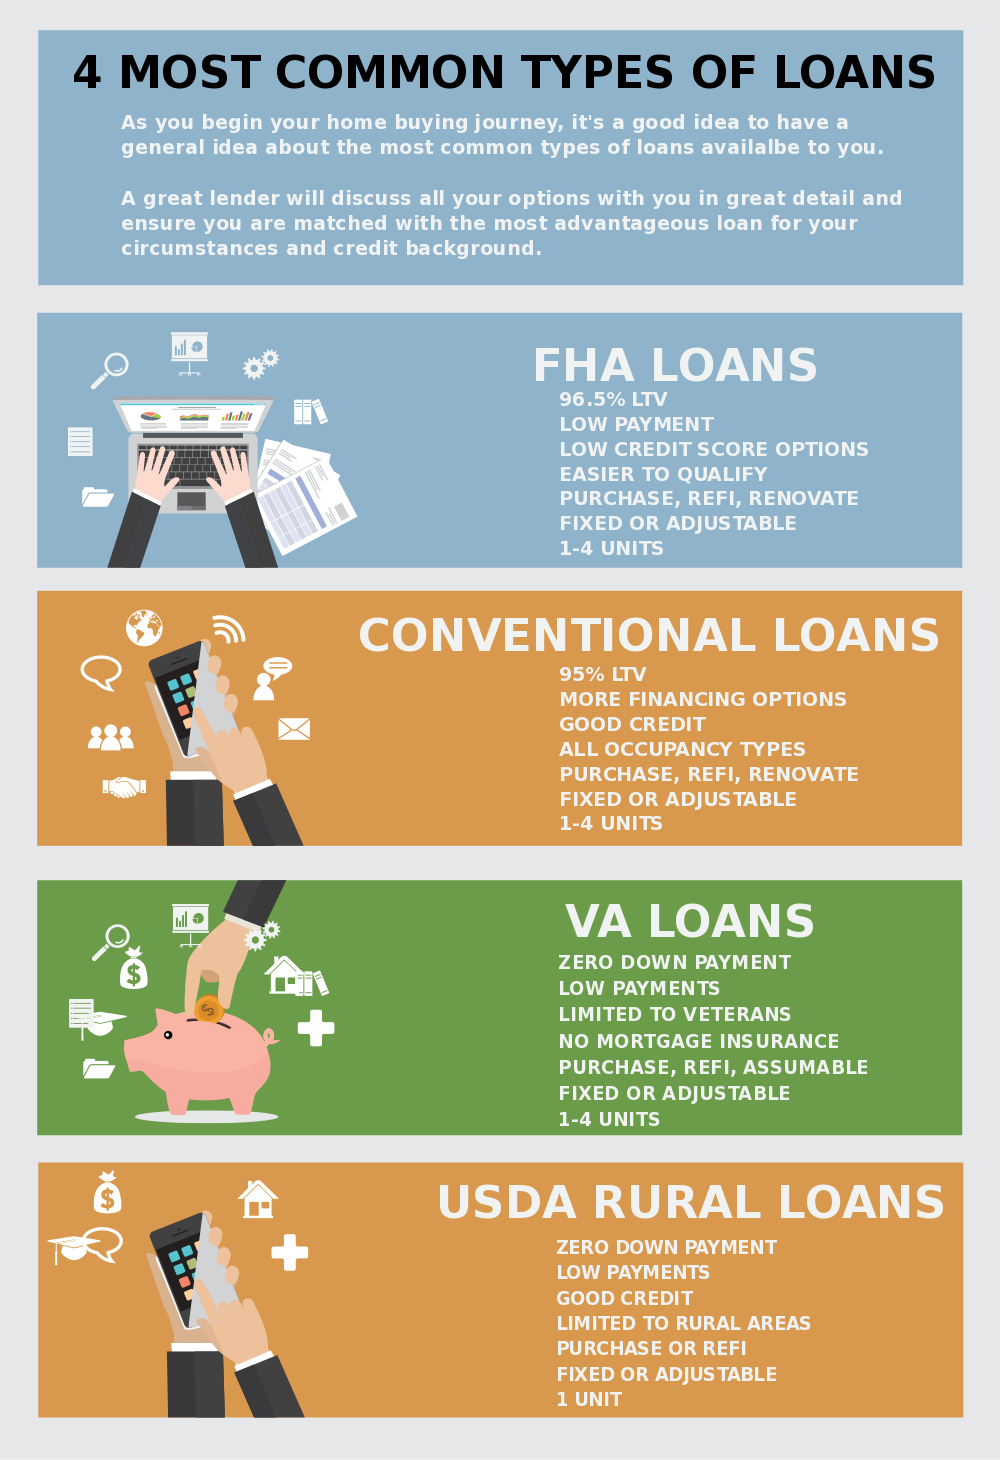 4-most-common-types-of-loans